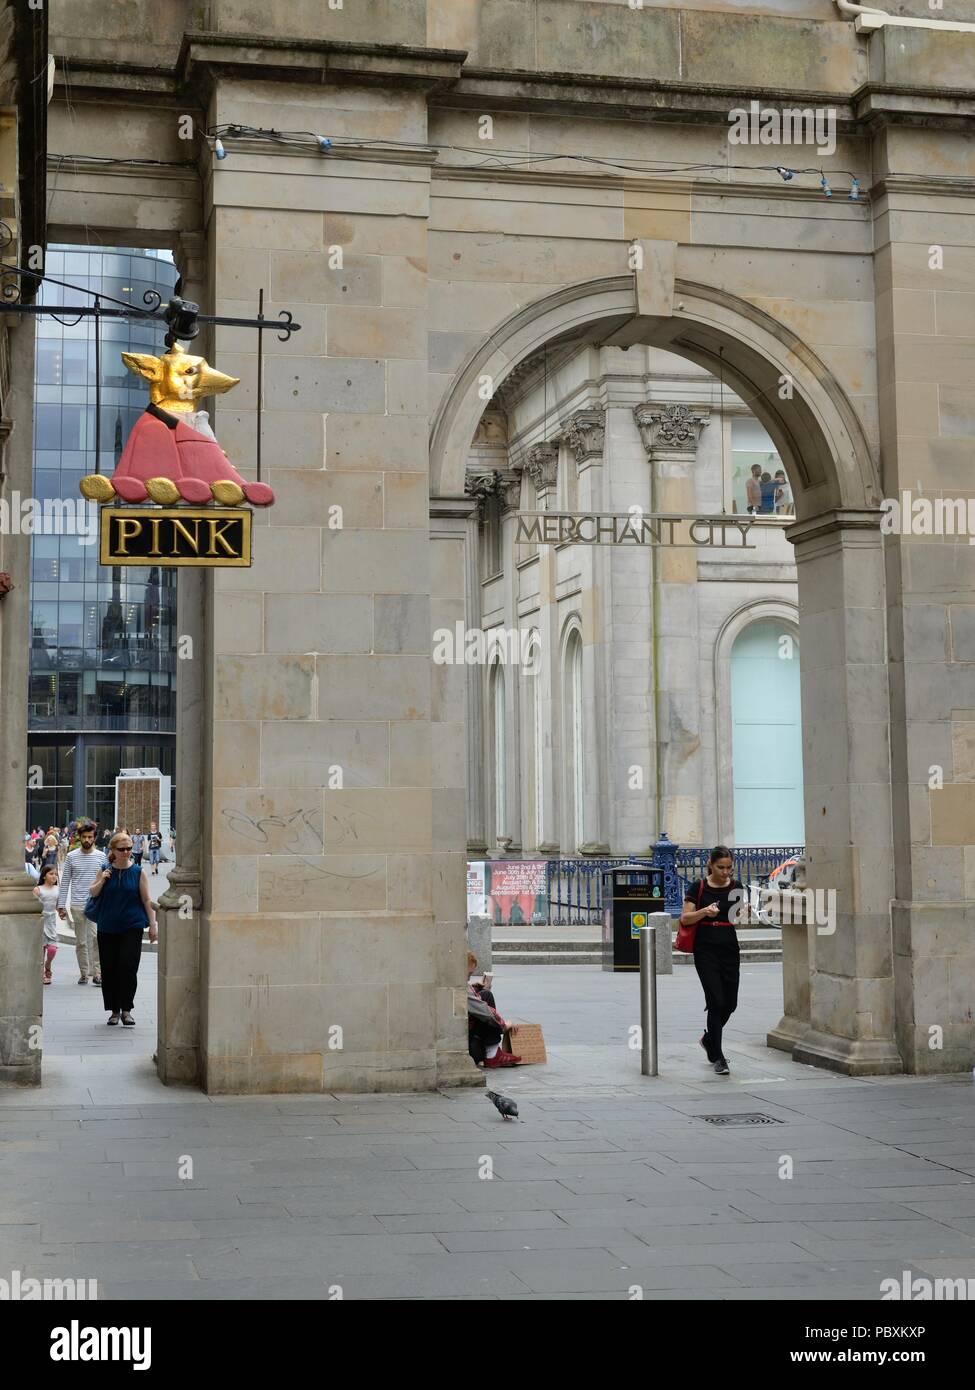 Thomas Pink shop sign and archway architecture leading to Royal Exchange Square in the centre of Glasgow, Scotland, UK Stock Photo